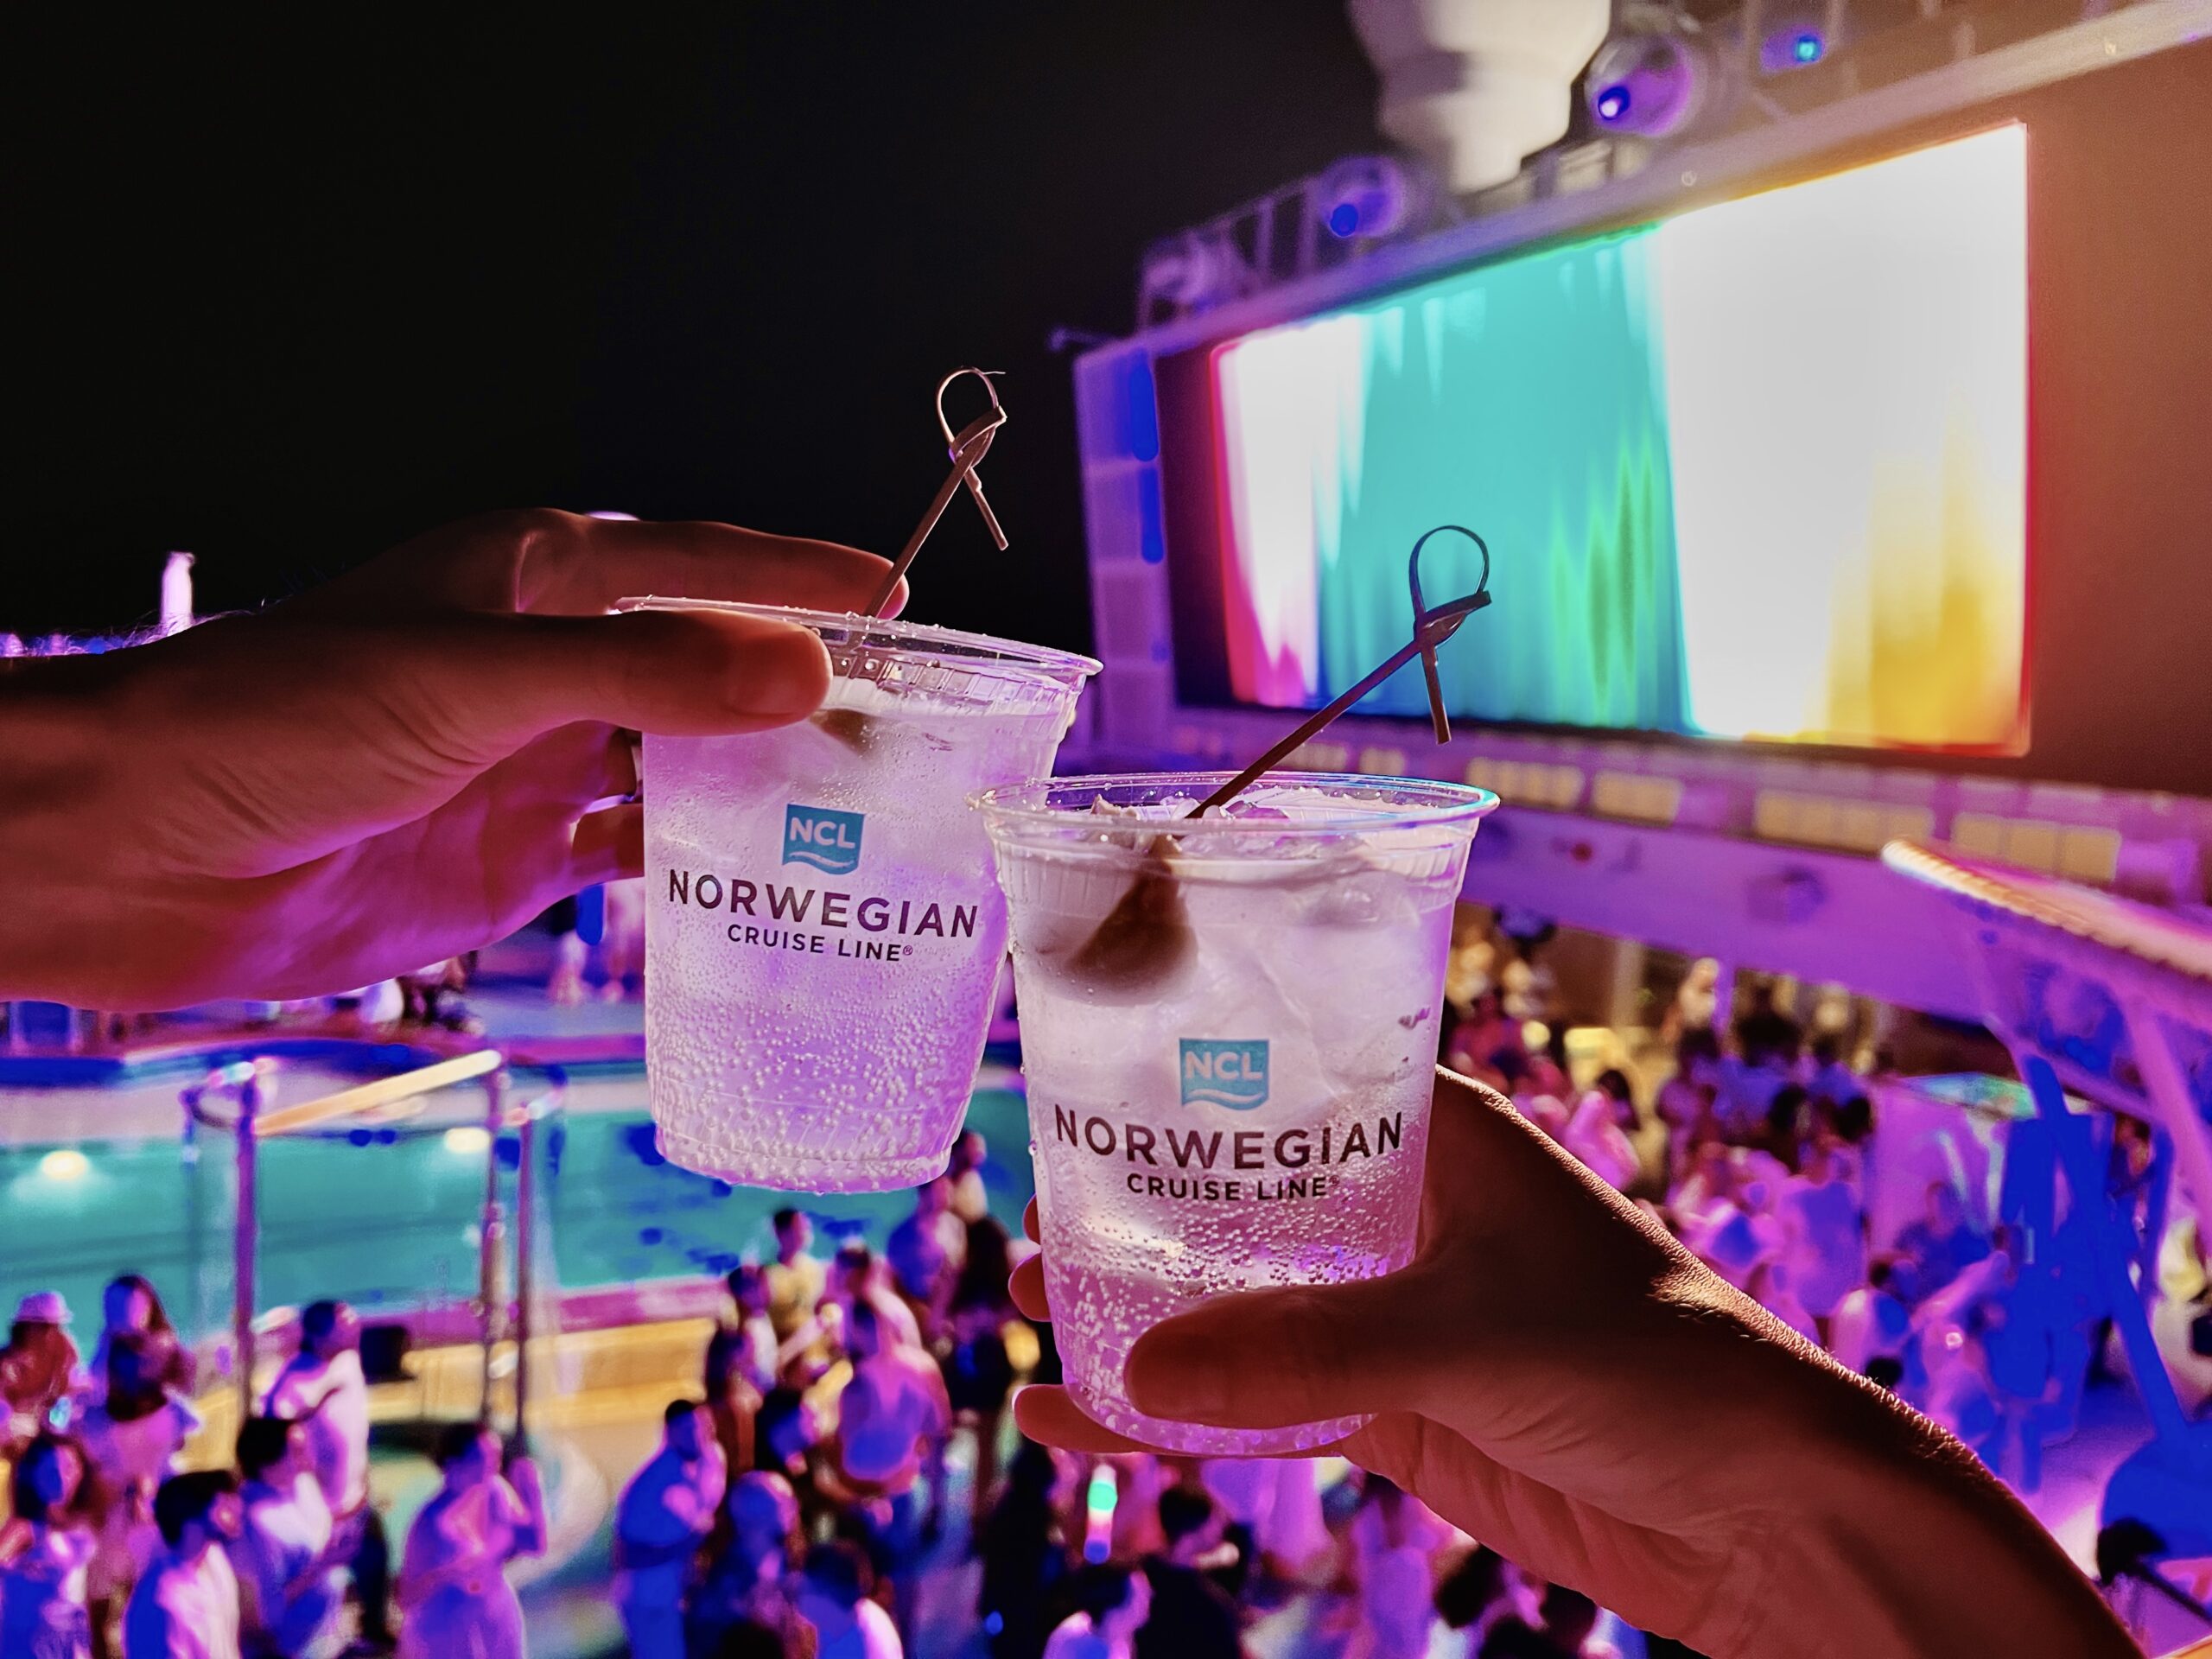 How Much Is The Drink Package On Norwegian Cruise Line?